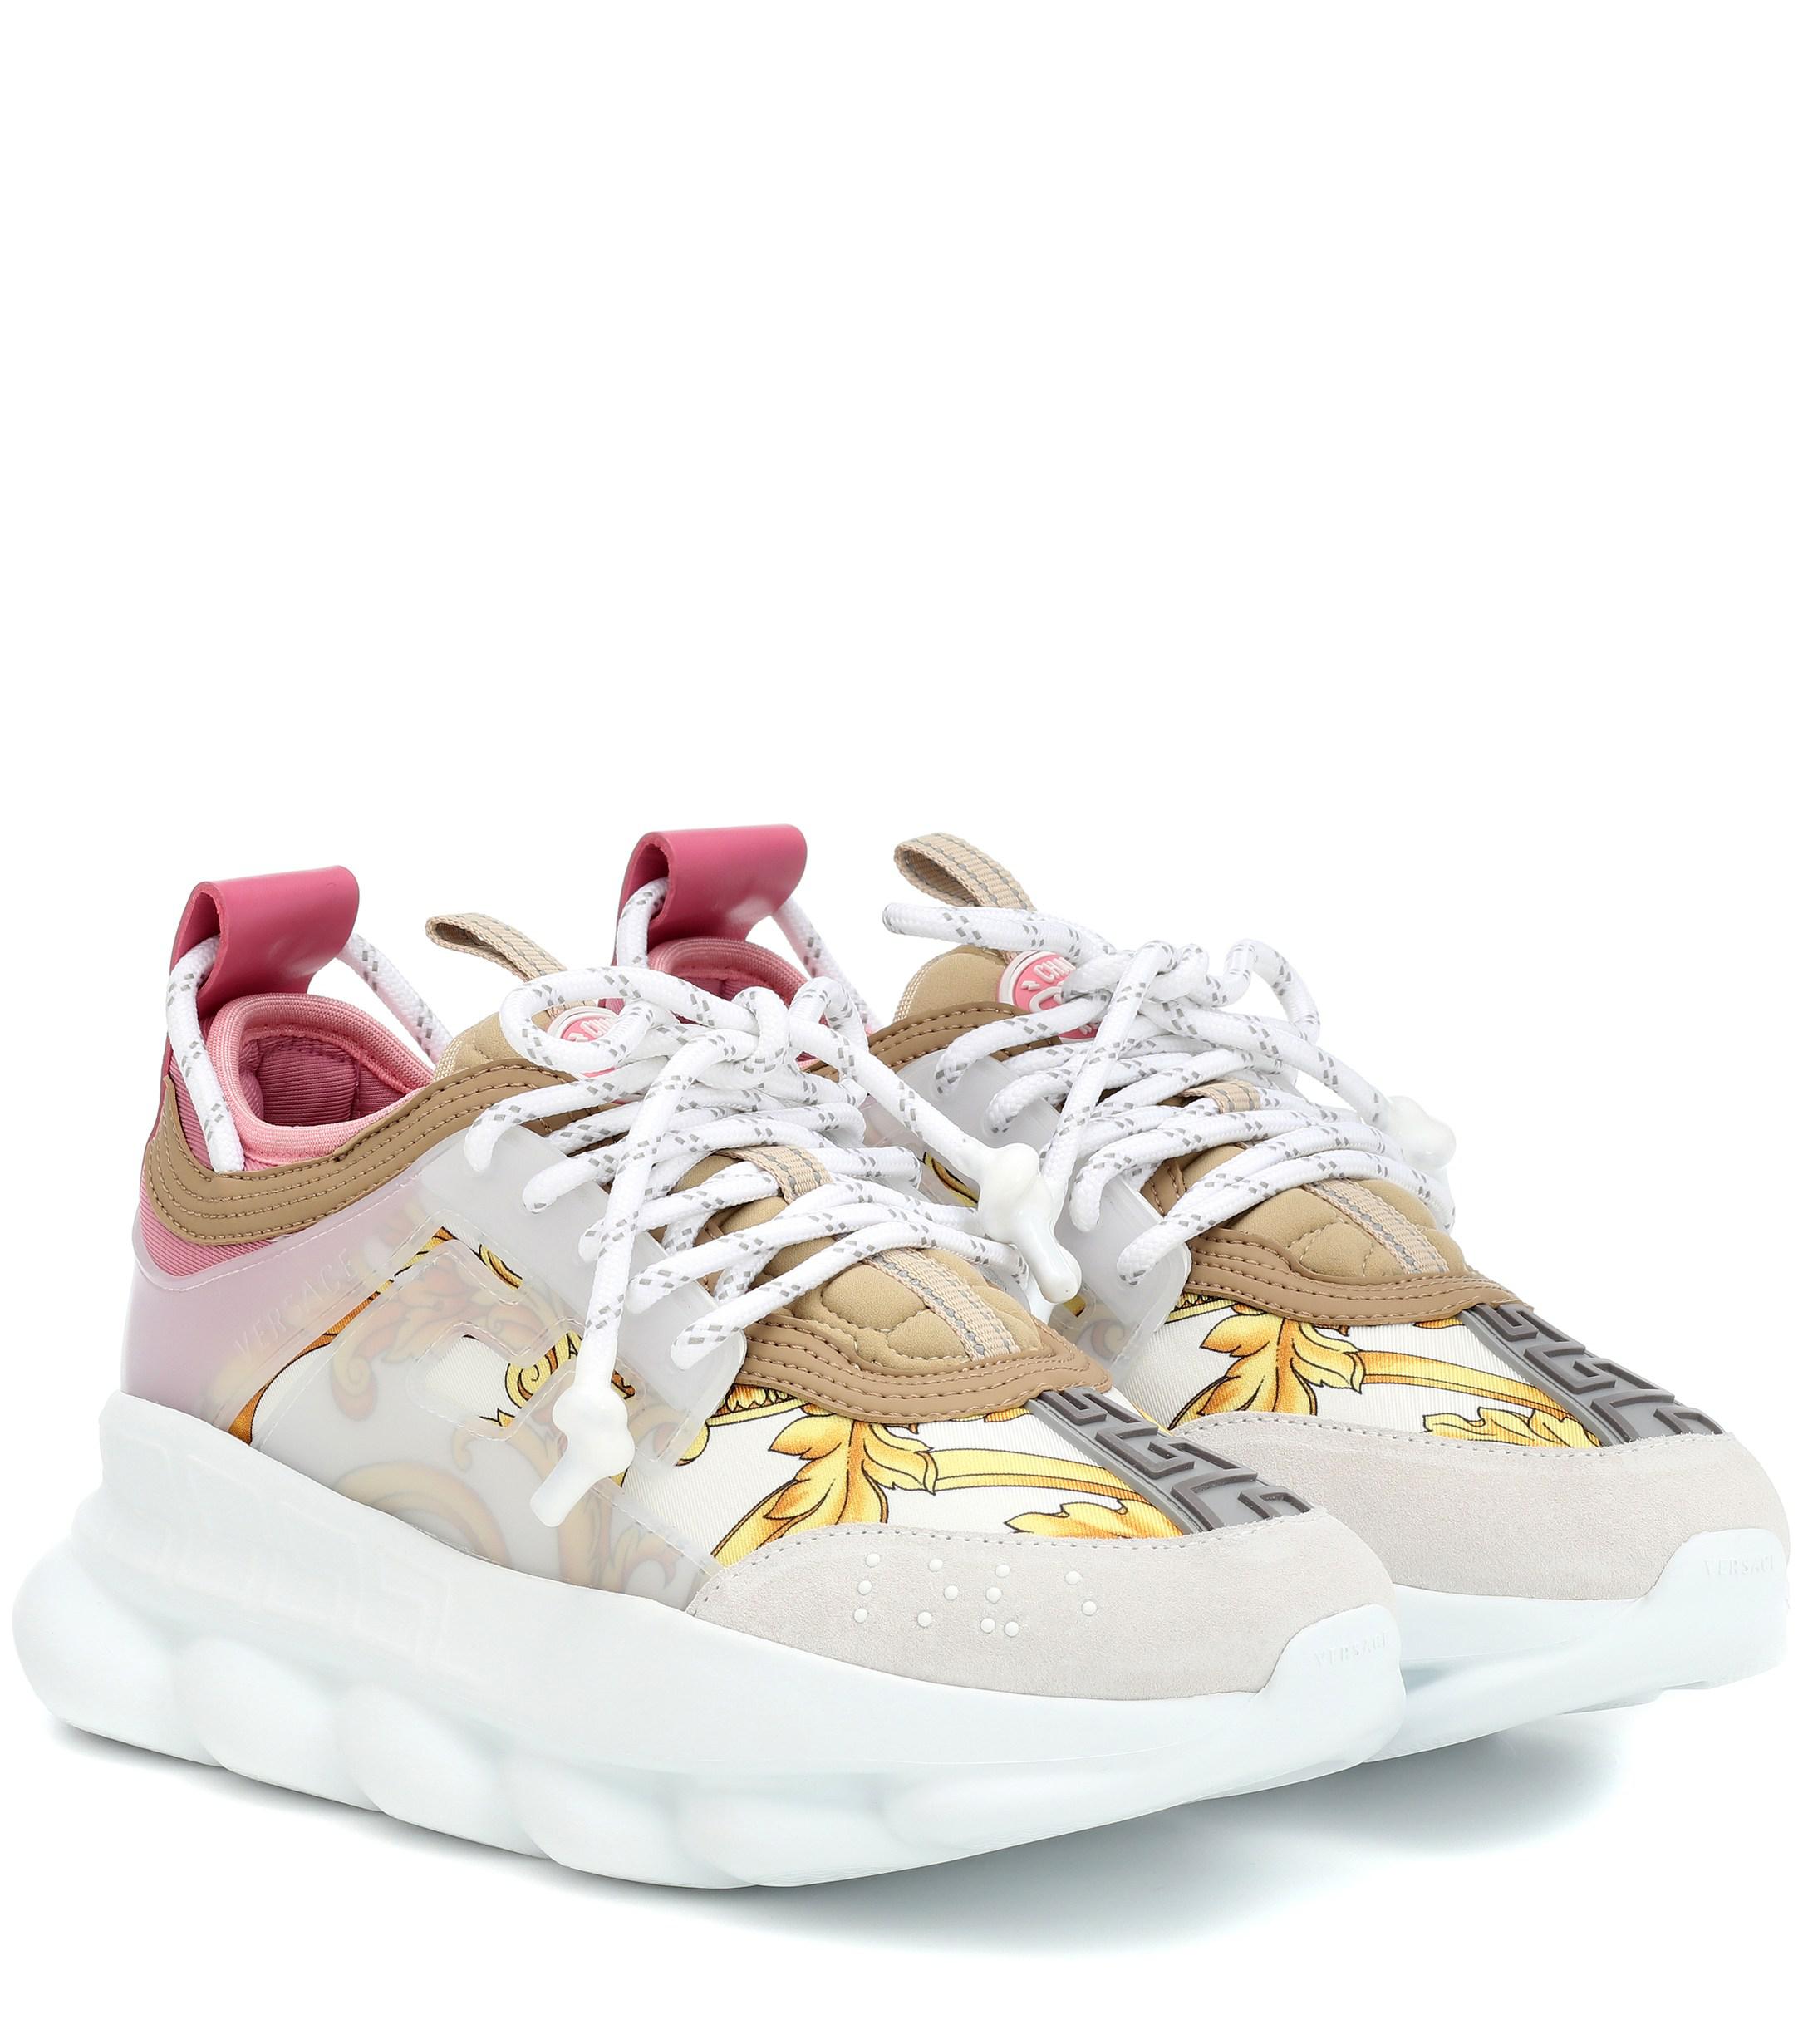 Versace Chain Reaction White Pink Yellow Barocco (Women's) -  DSR705G-DICTG_DB5OS - US